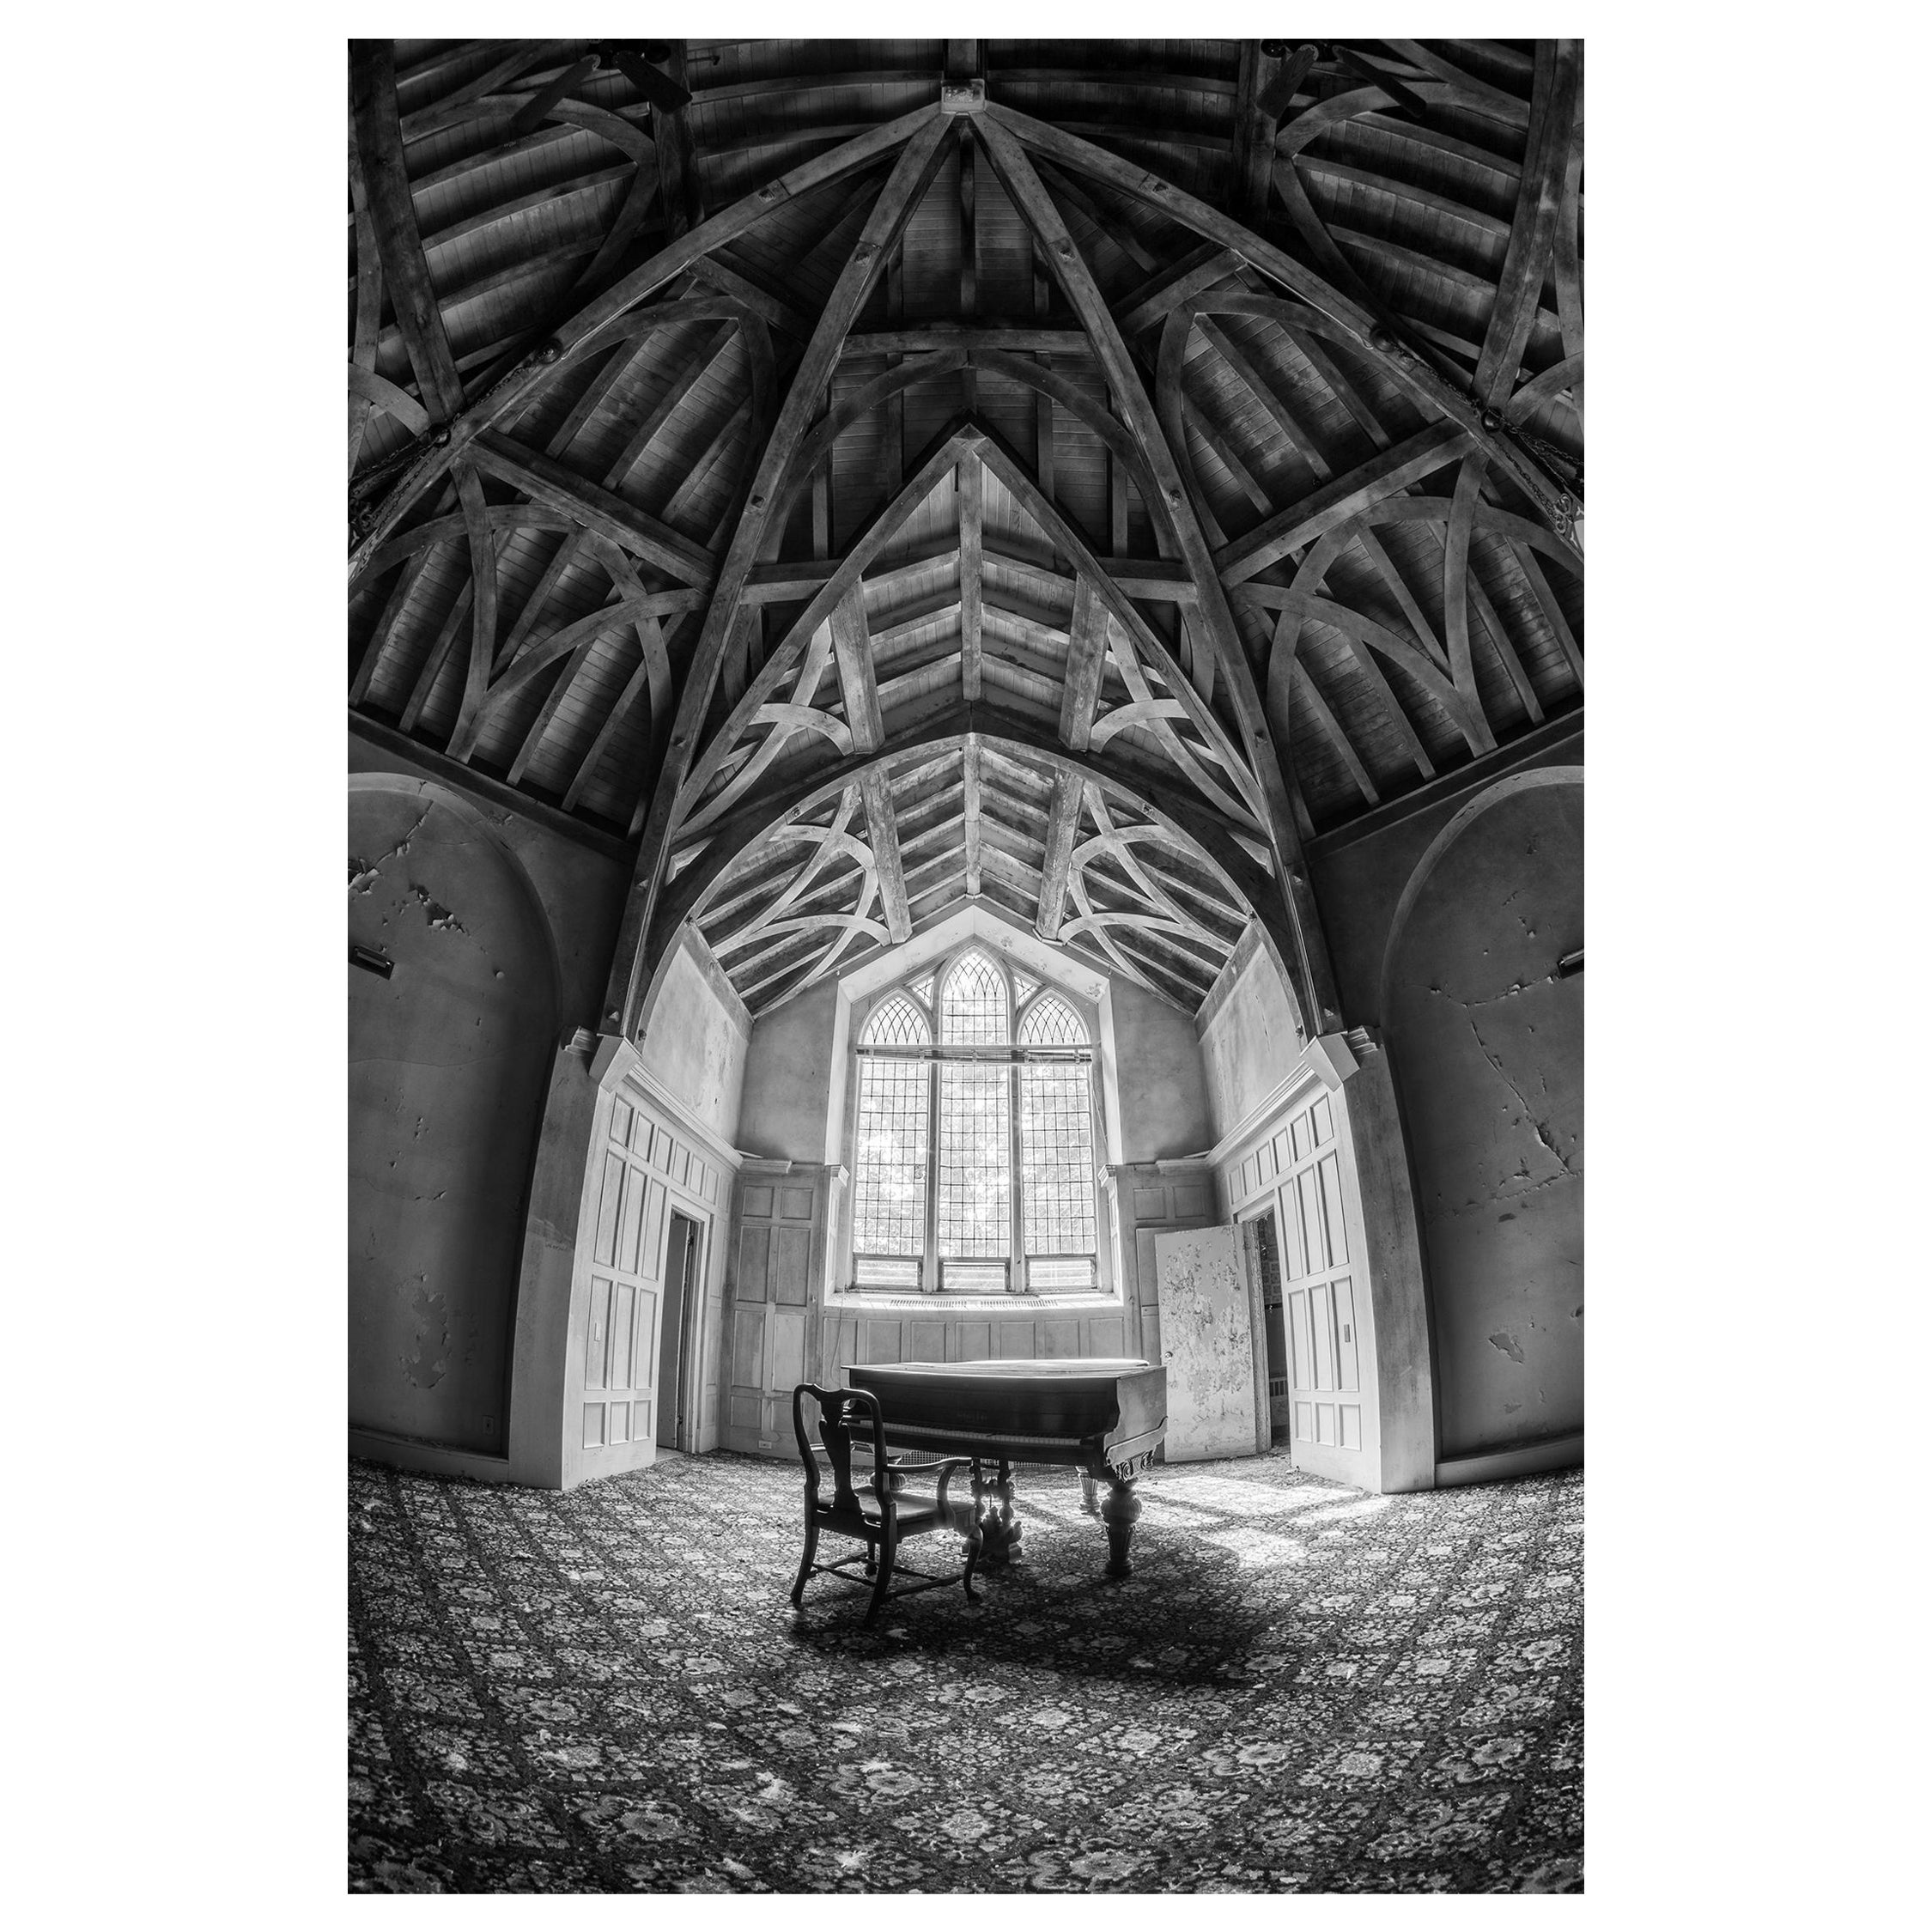 "Peace", abandoned, black and white, piano, mansion, architecture, photograph - Photograph by Rebecca Skinner